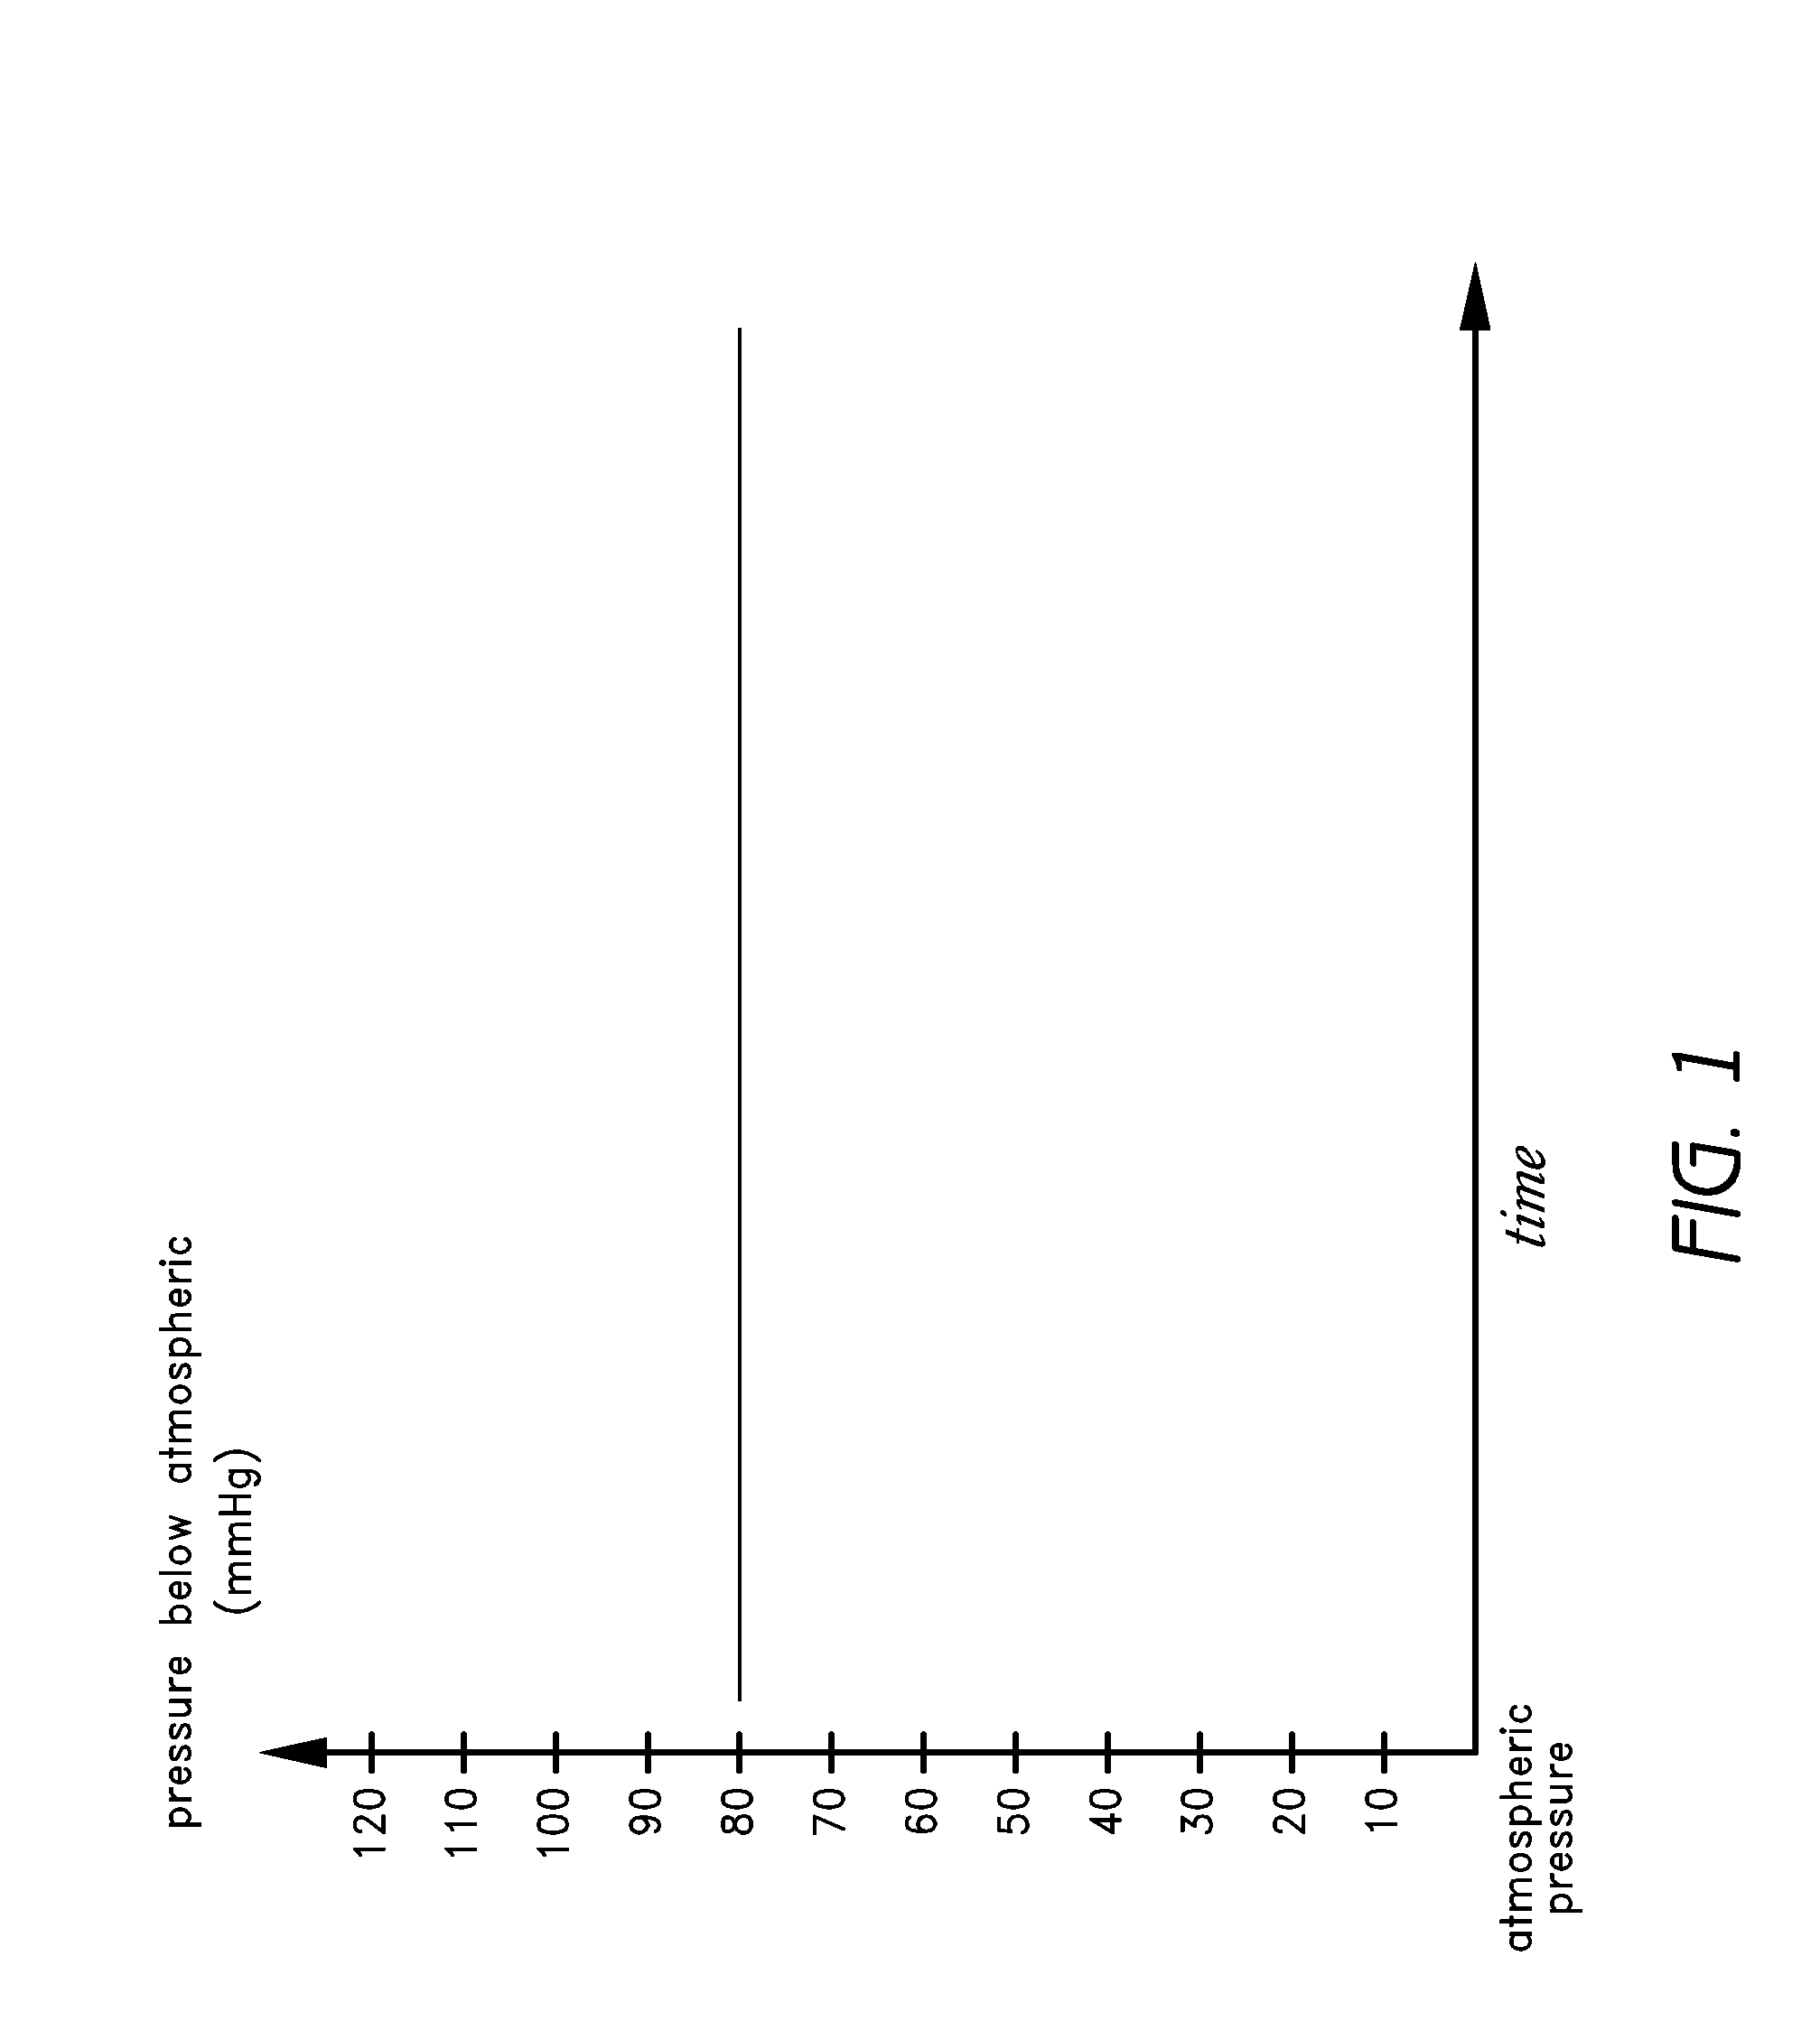 Sustained variable negative pressure wound treatment and method of controlling same